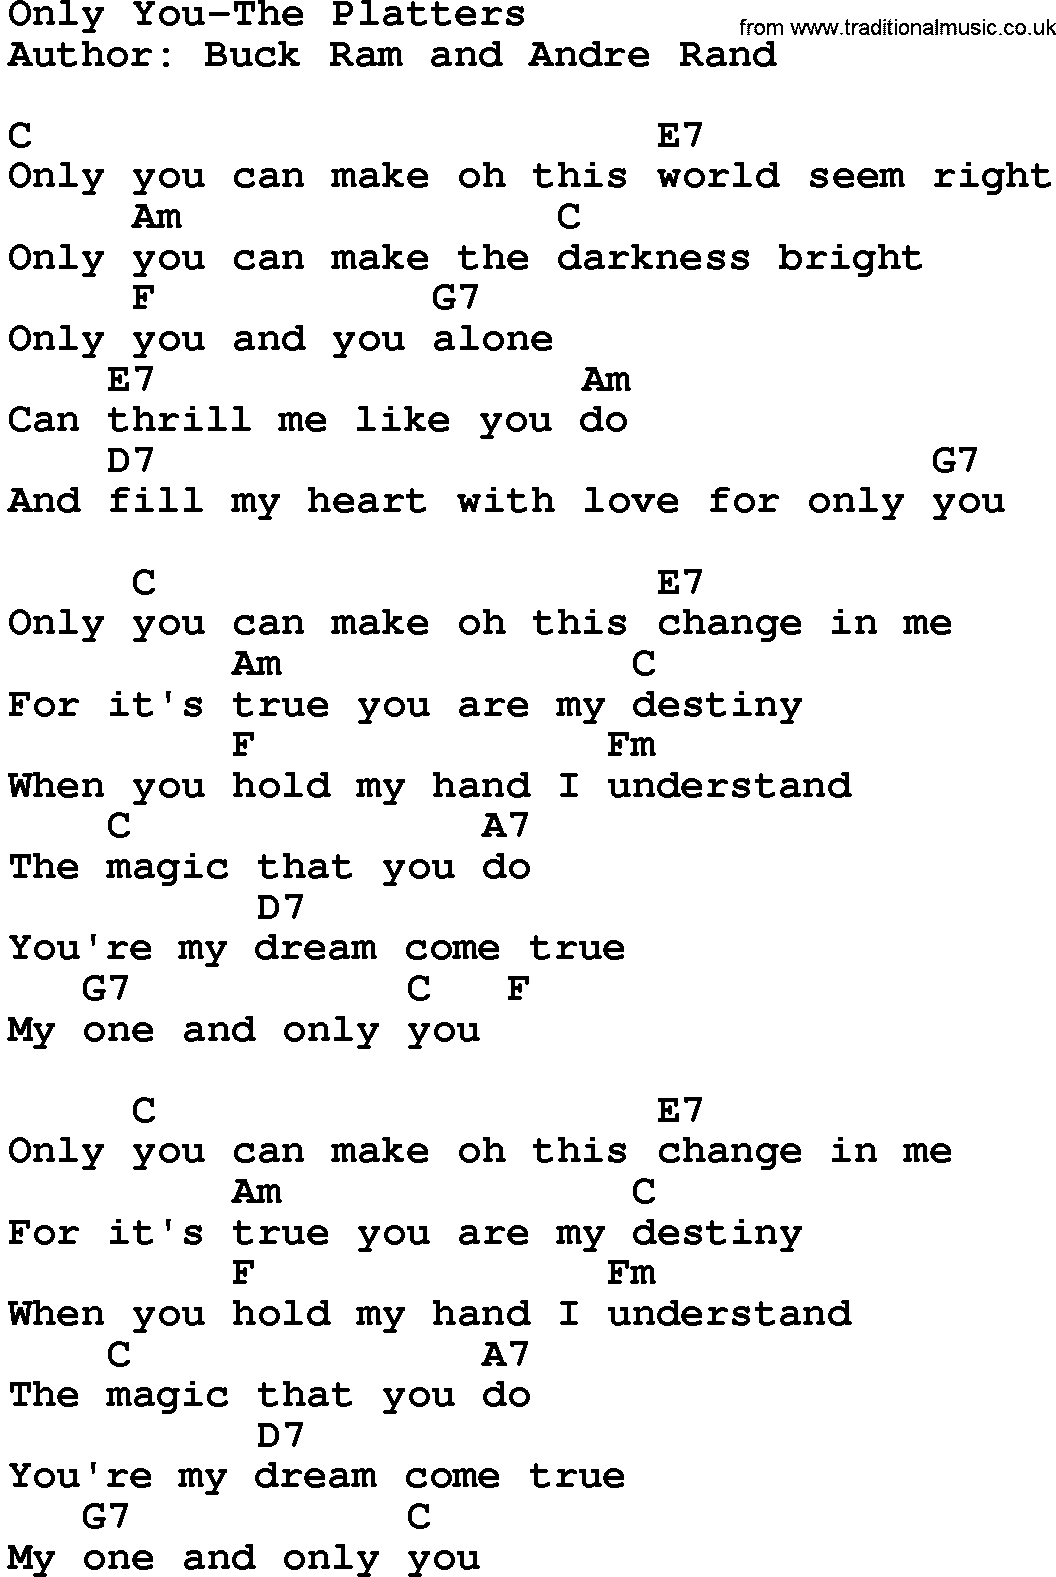 Country music song: Only You-The Platters lyrics and chords